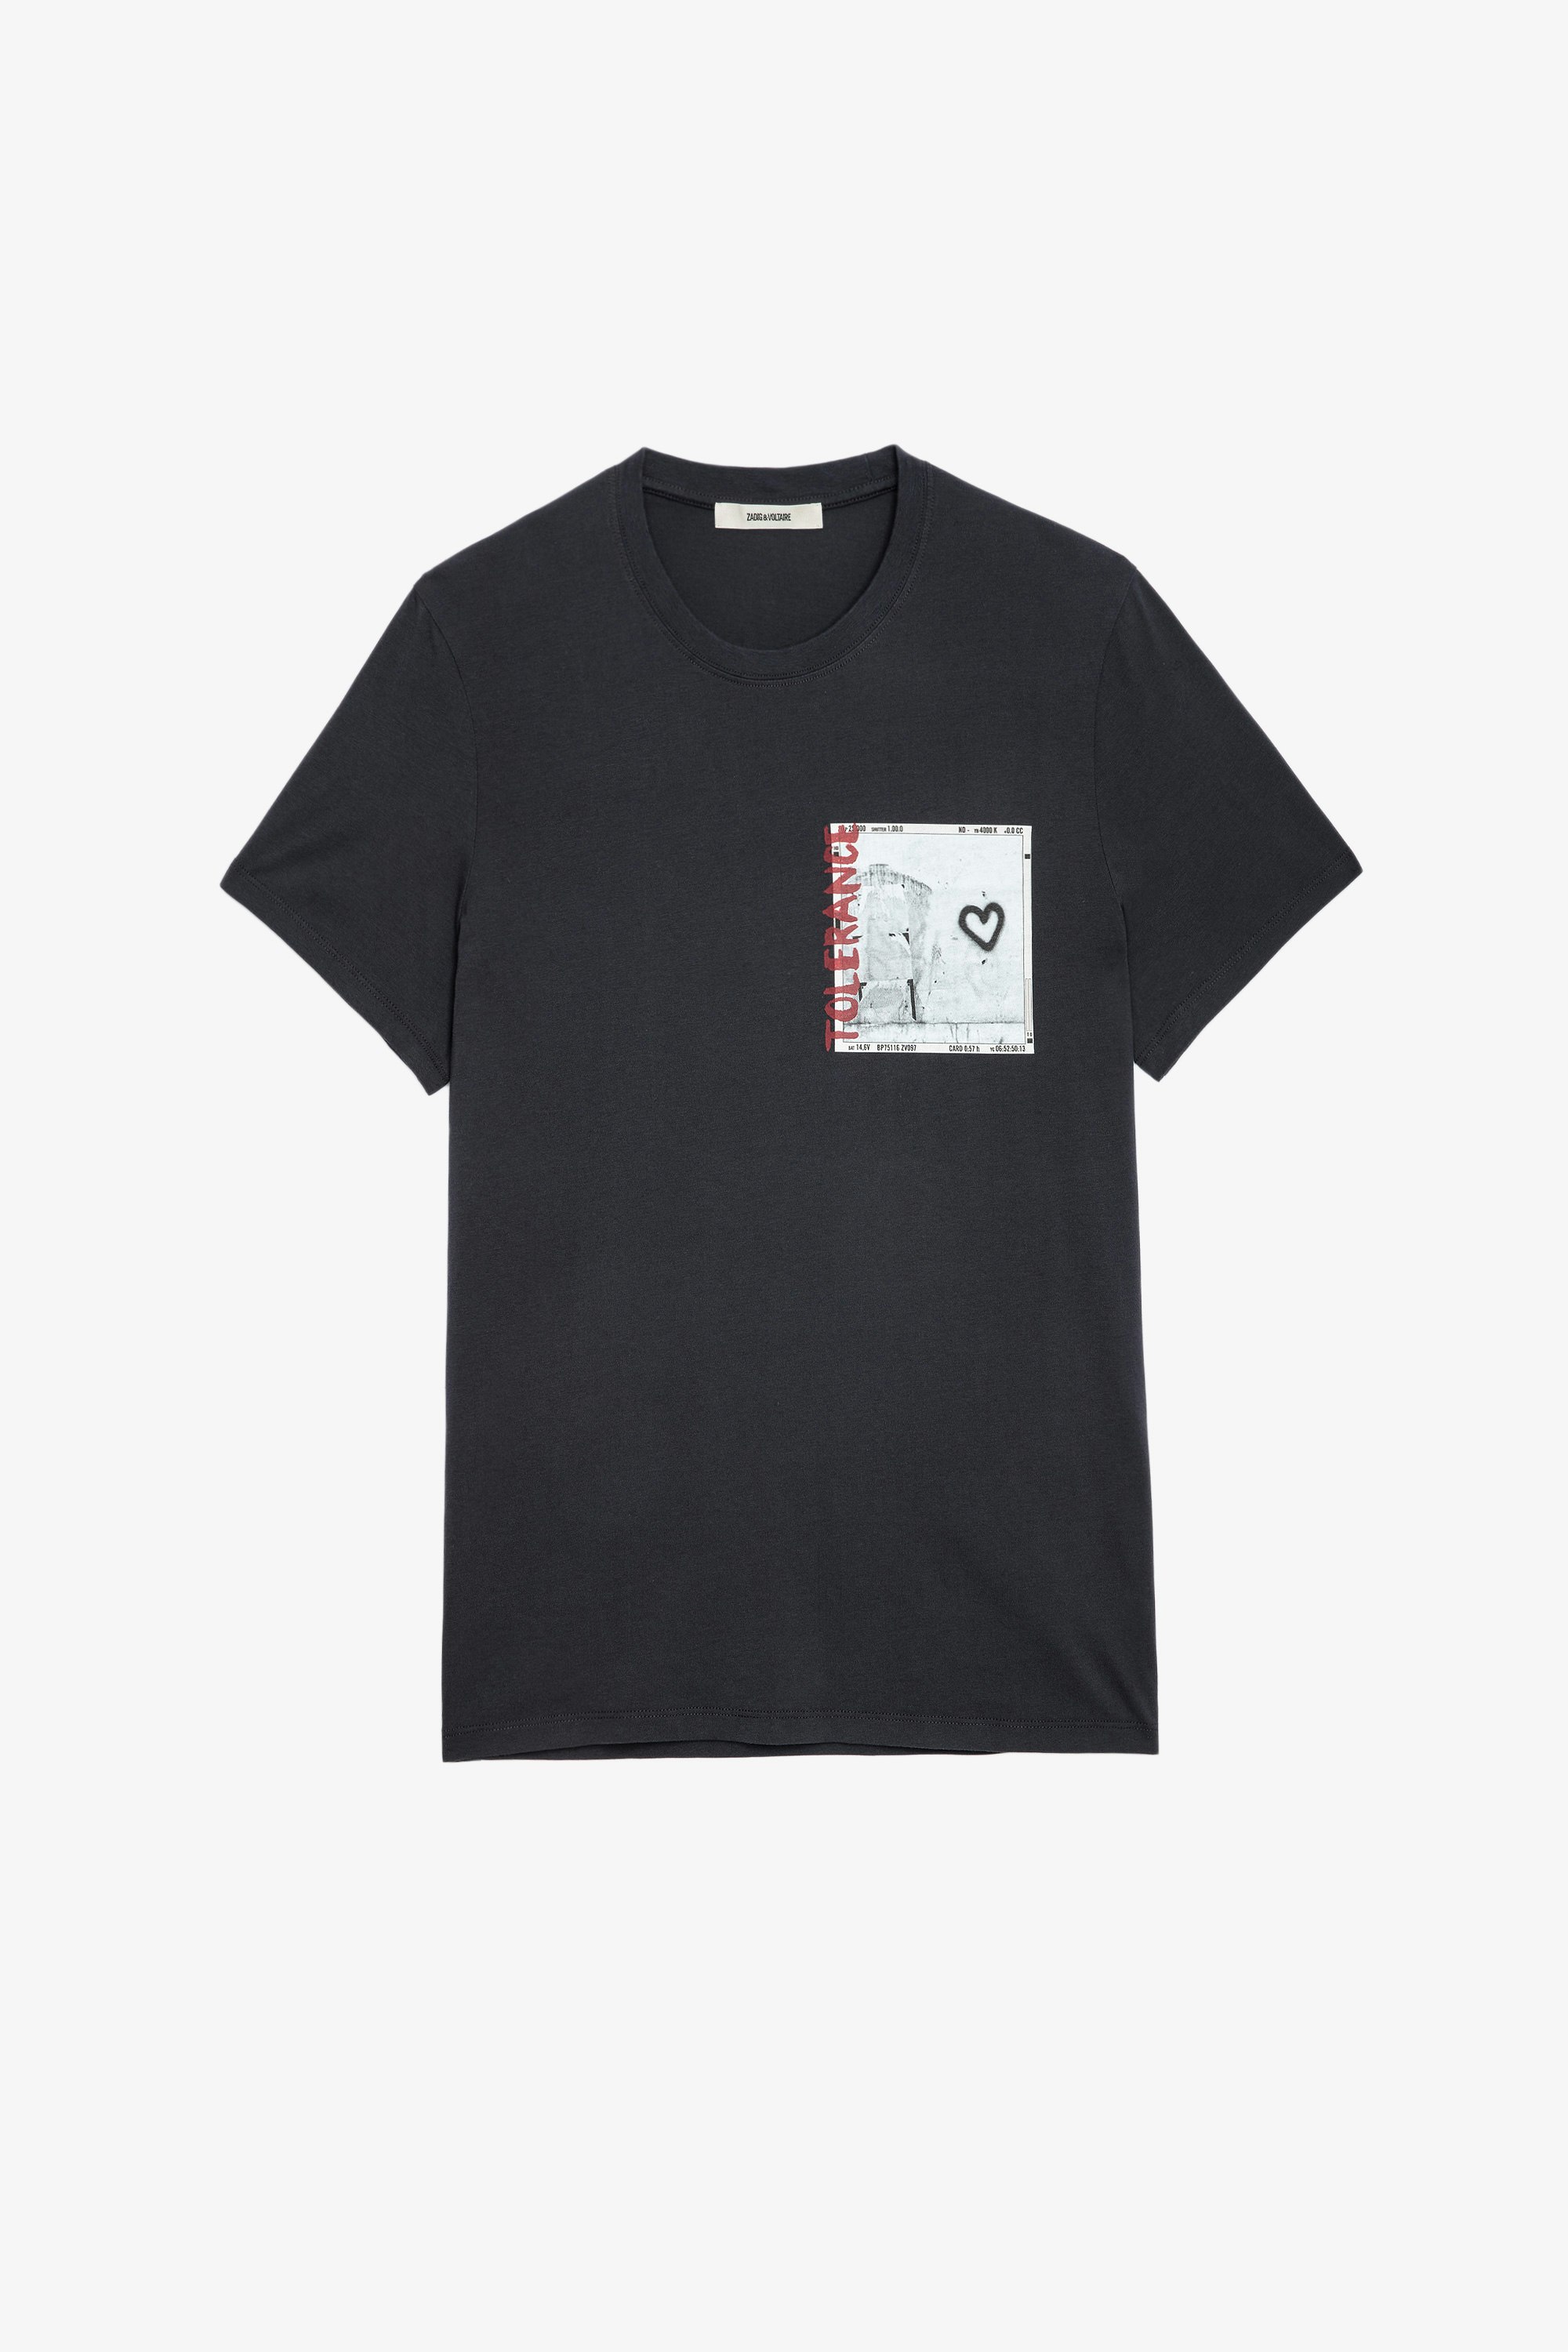 Ted フォトプリント Ｔシャツ Men’s anthracite grey cotton T-shirt with photoprint